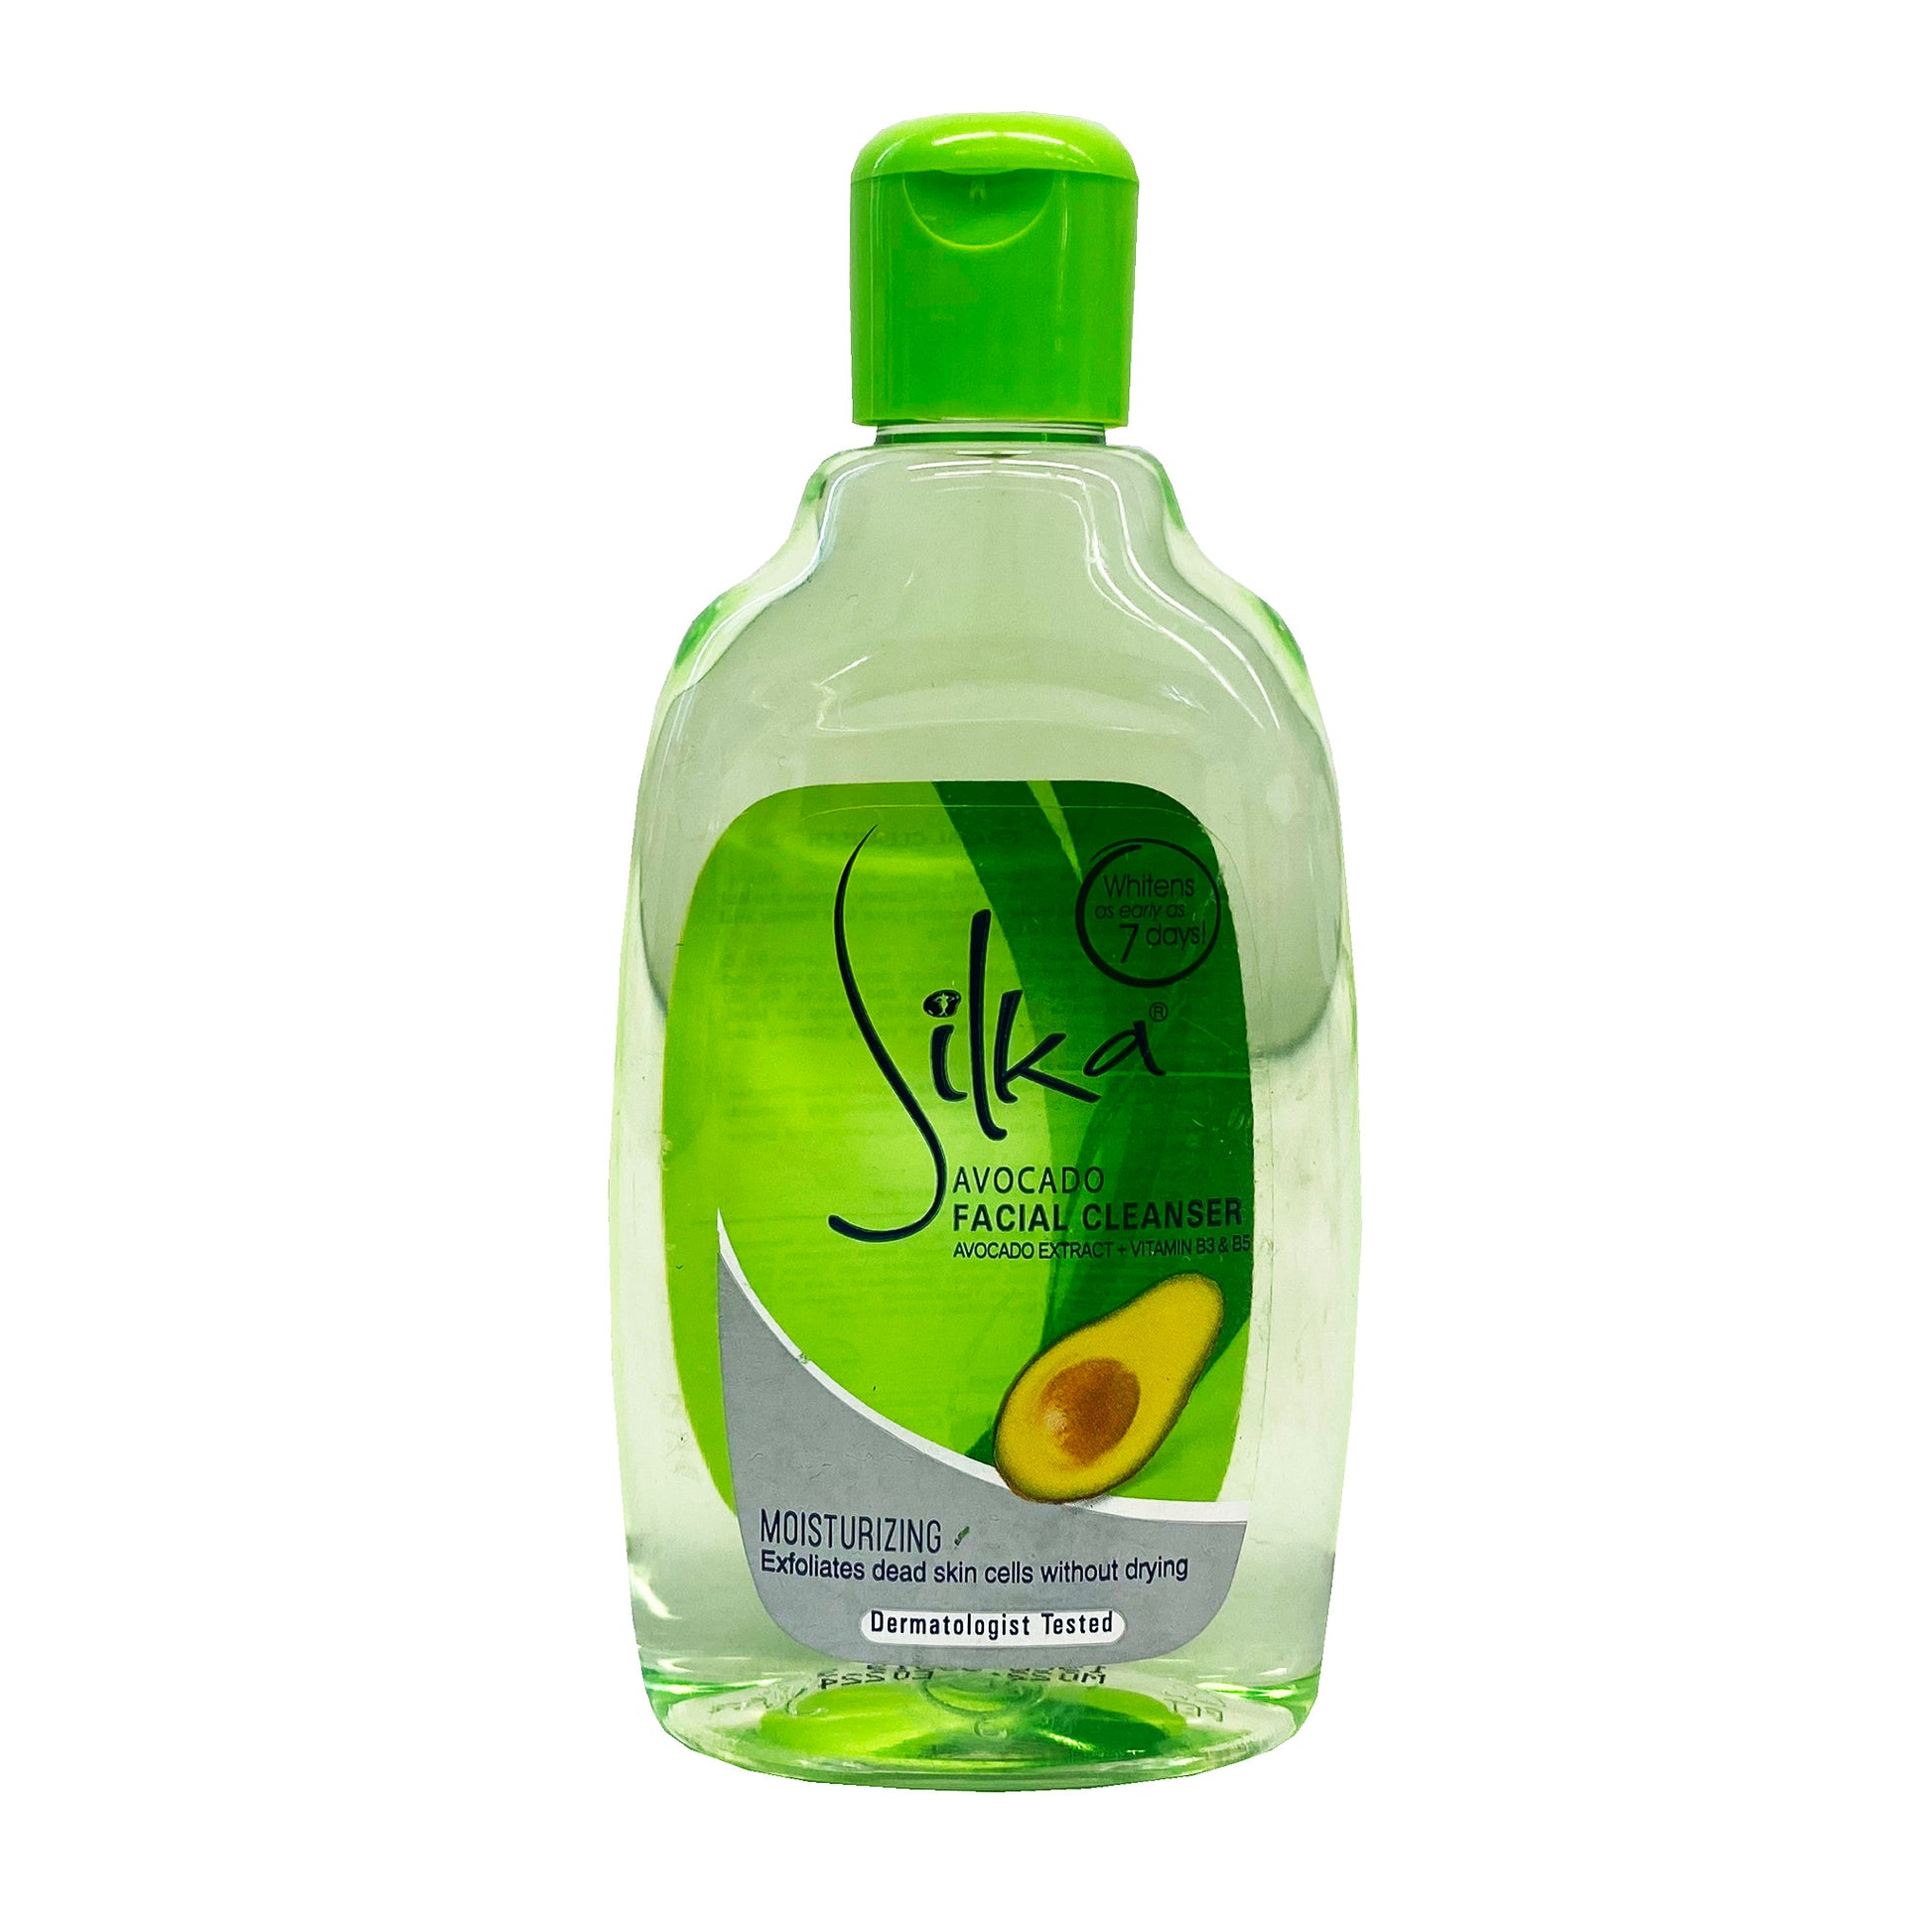 Front graphic view of Silka Facial Cleanser - Avocado 5.07oz